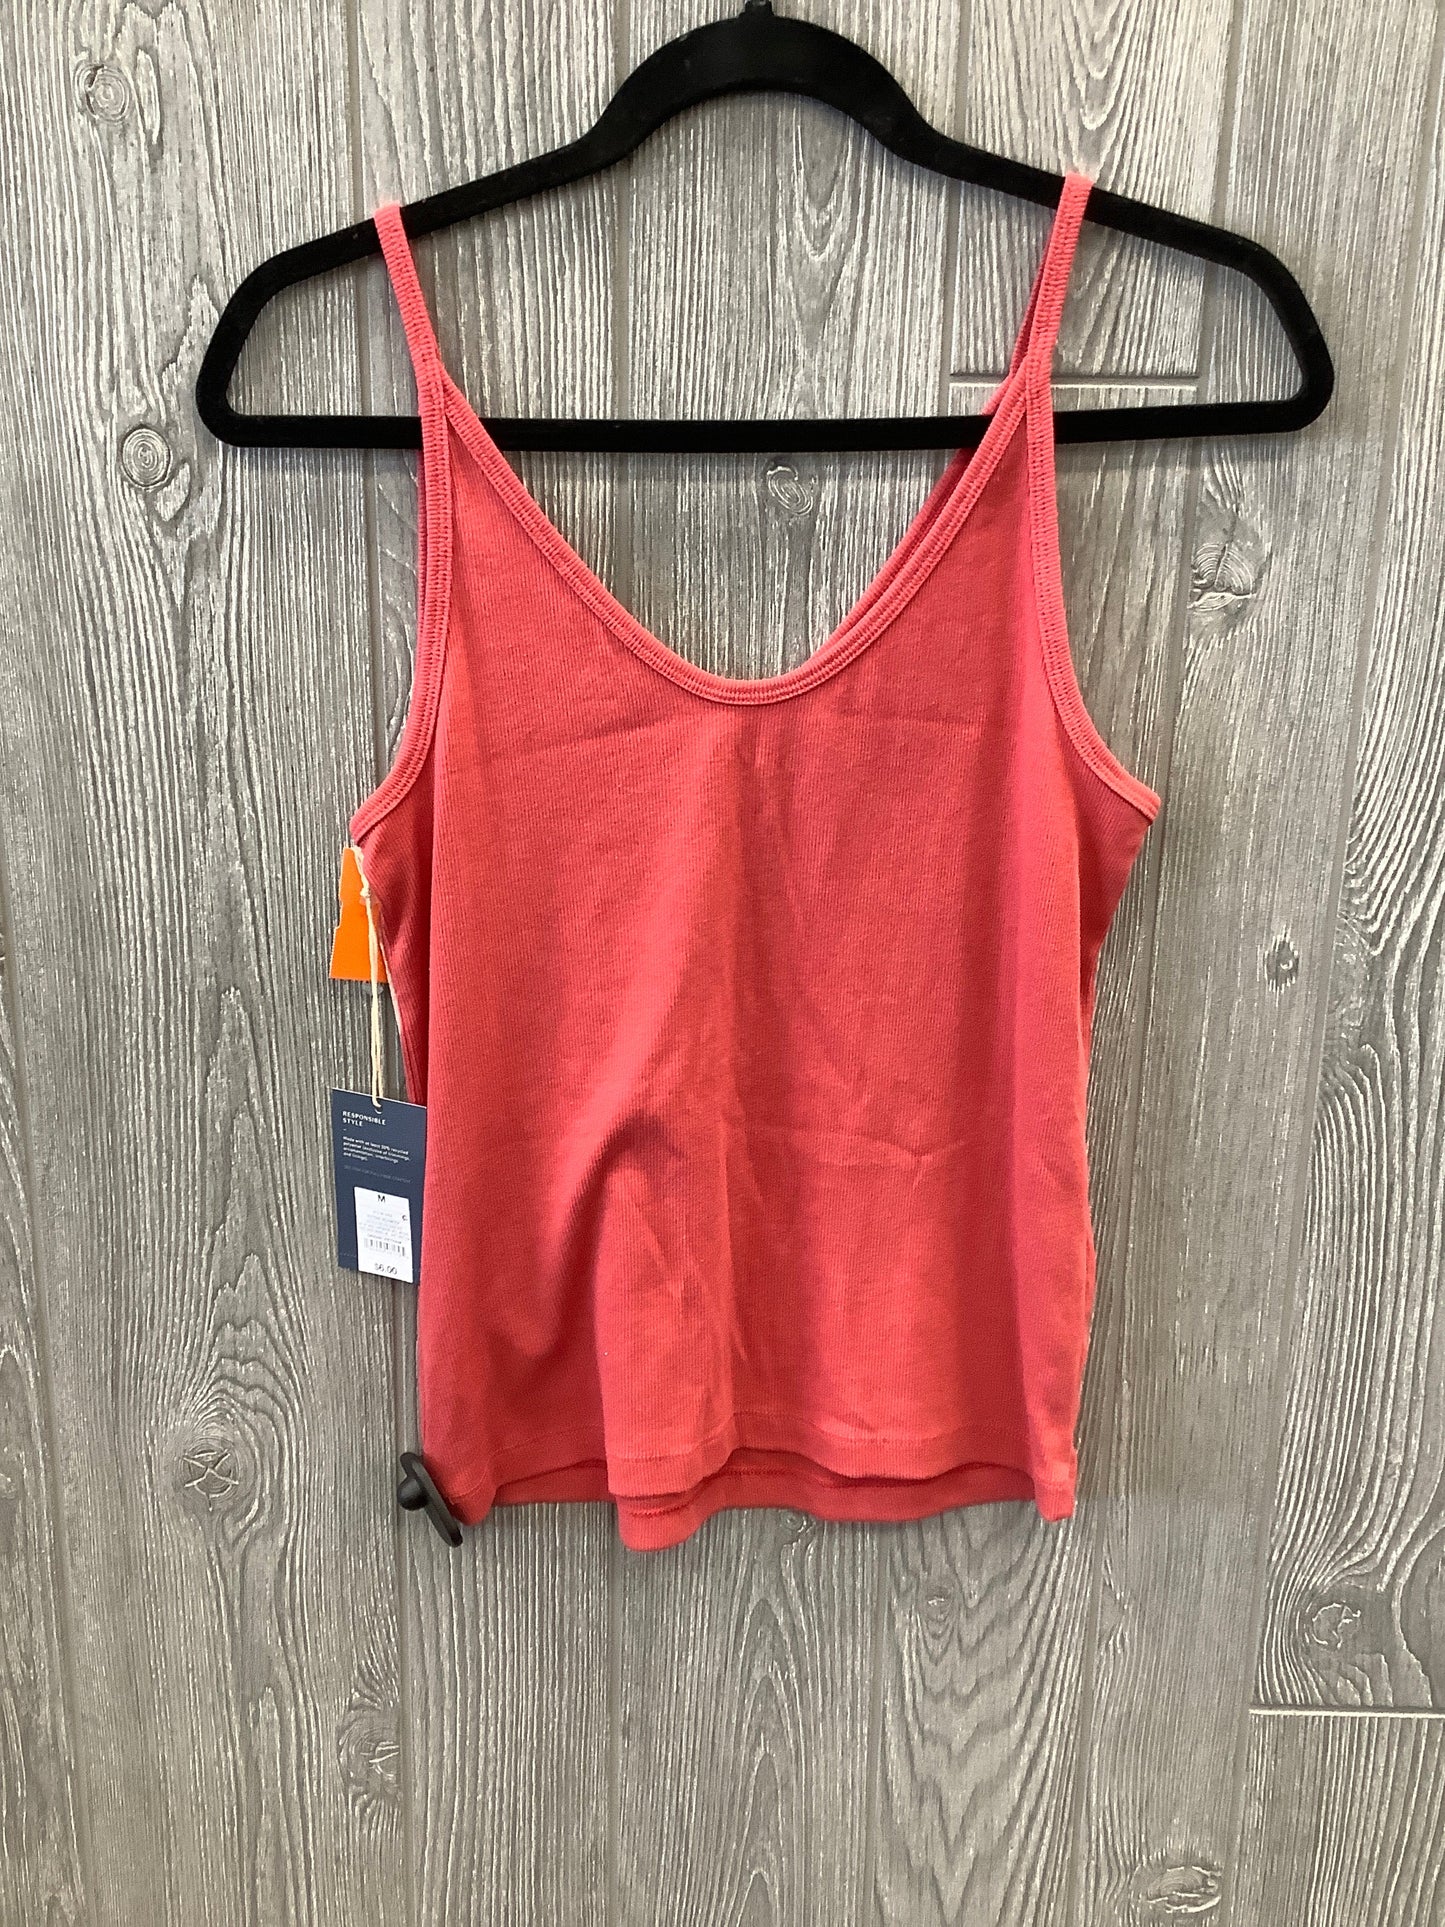 Top Cami By Universal Thread  Size: M